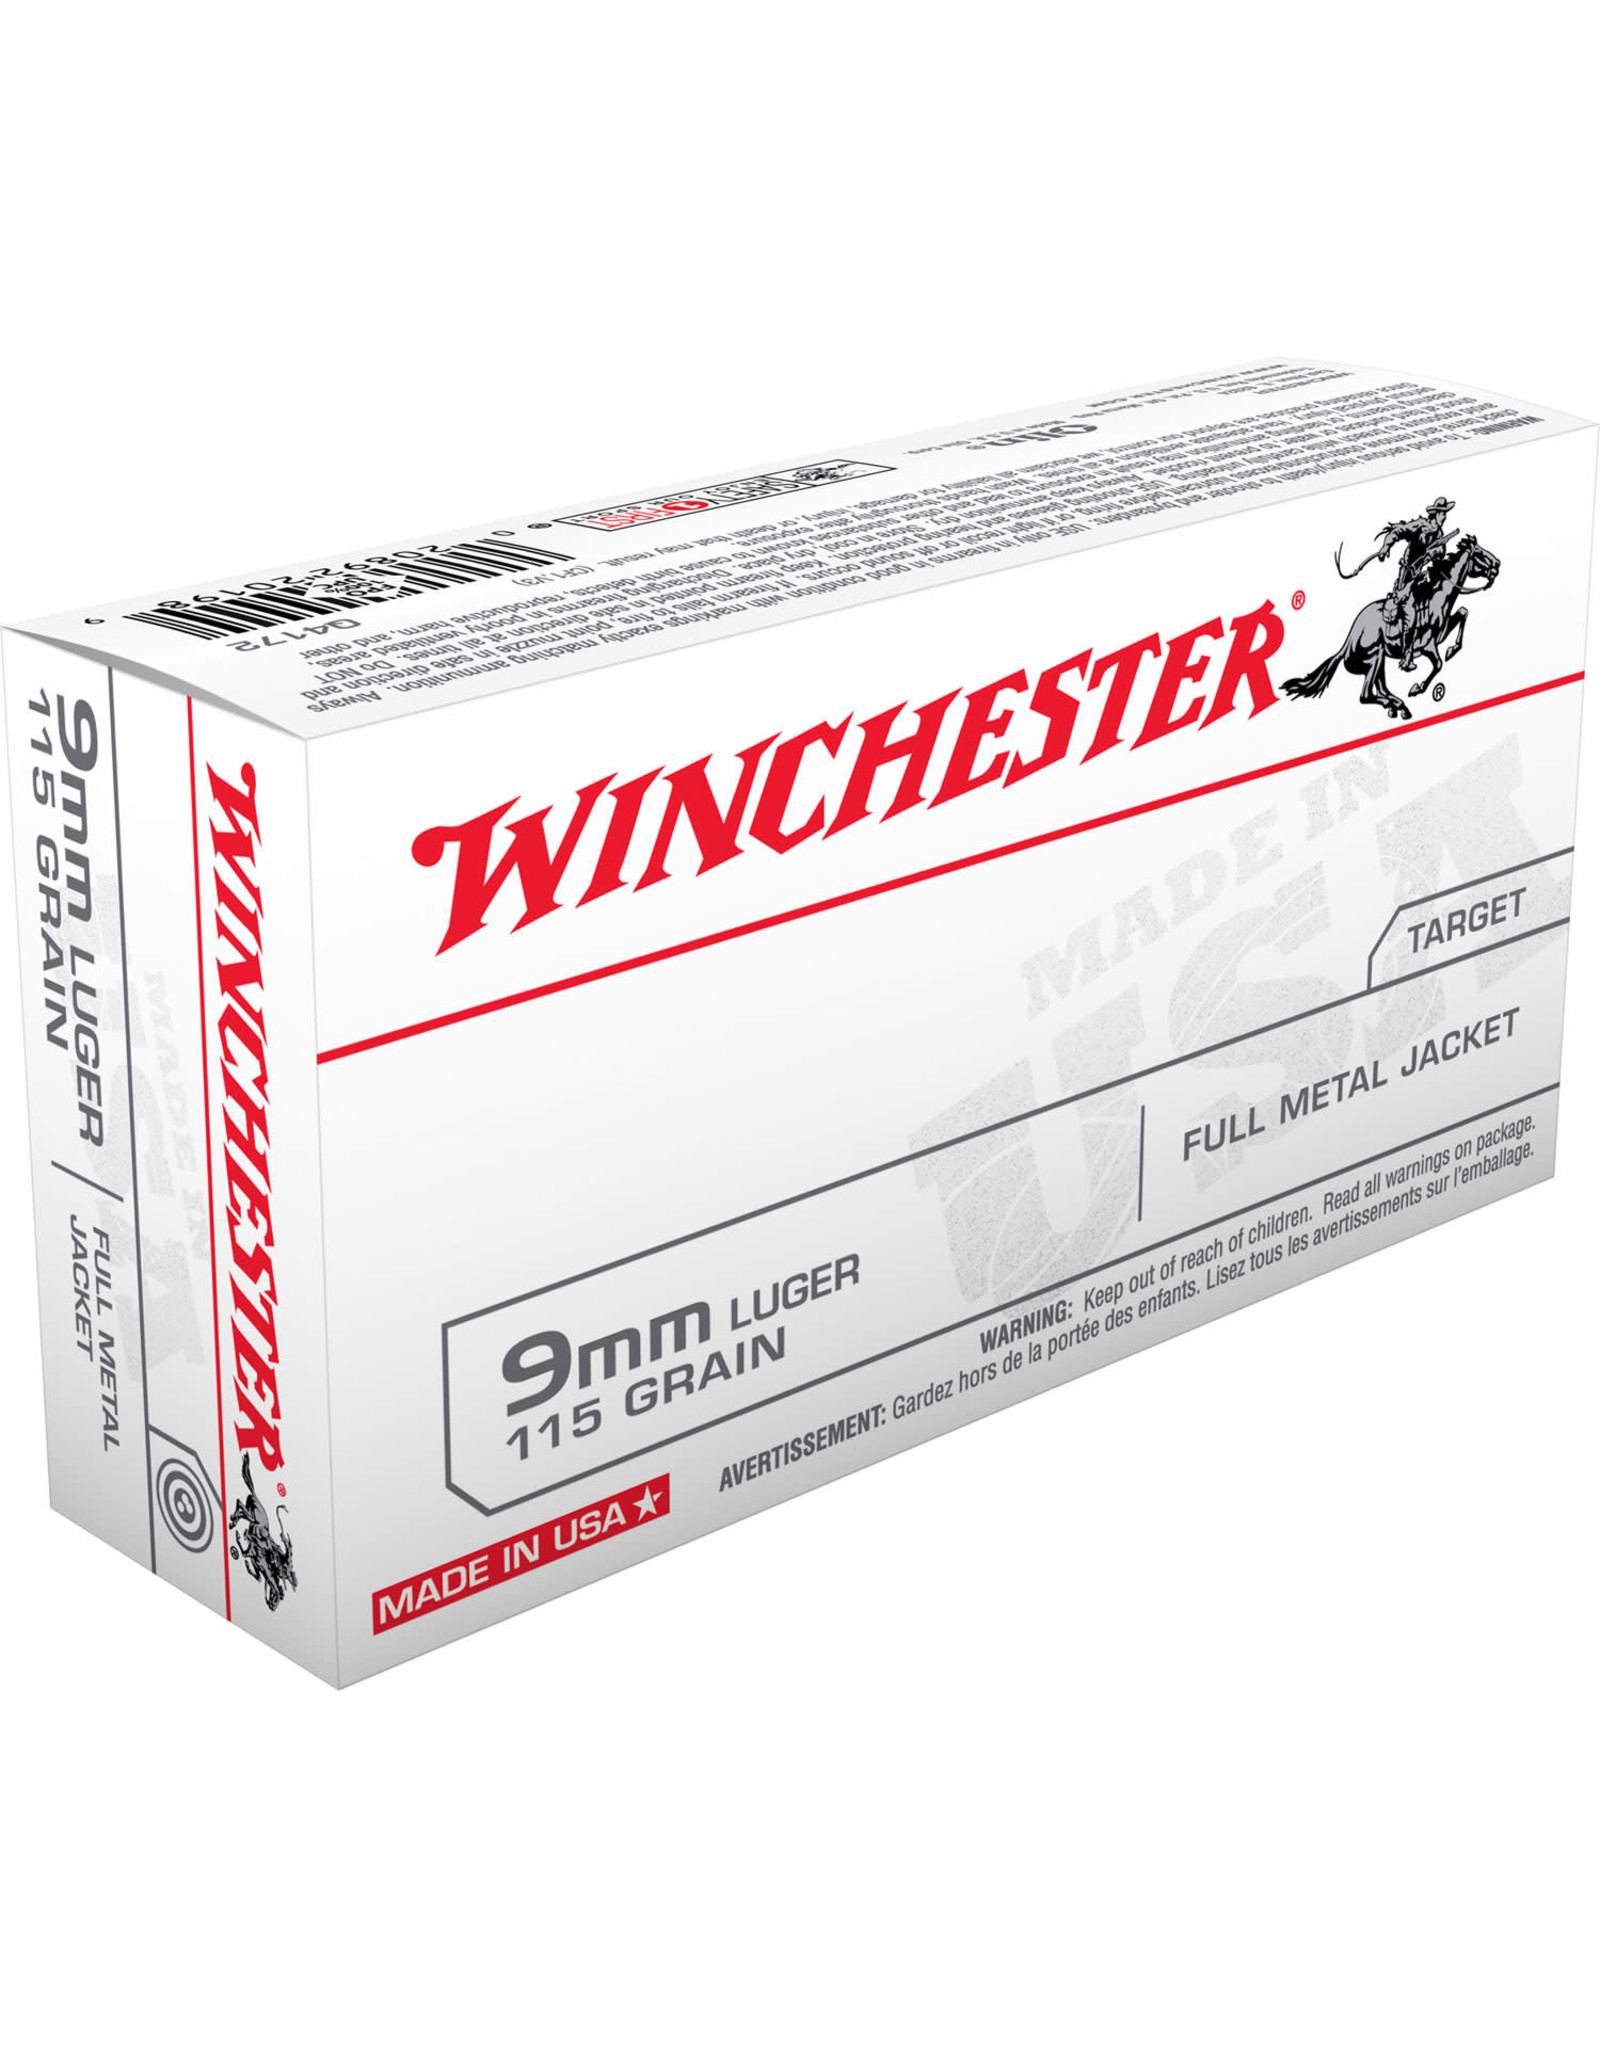 WINCHESTER AMMO Winchester 9mm 115 Gr FMJ - 50 Count